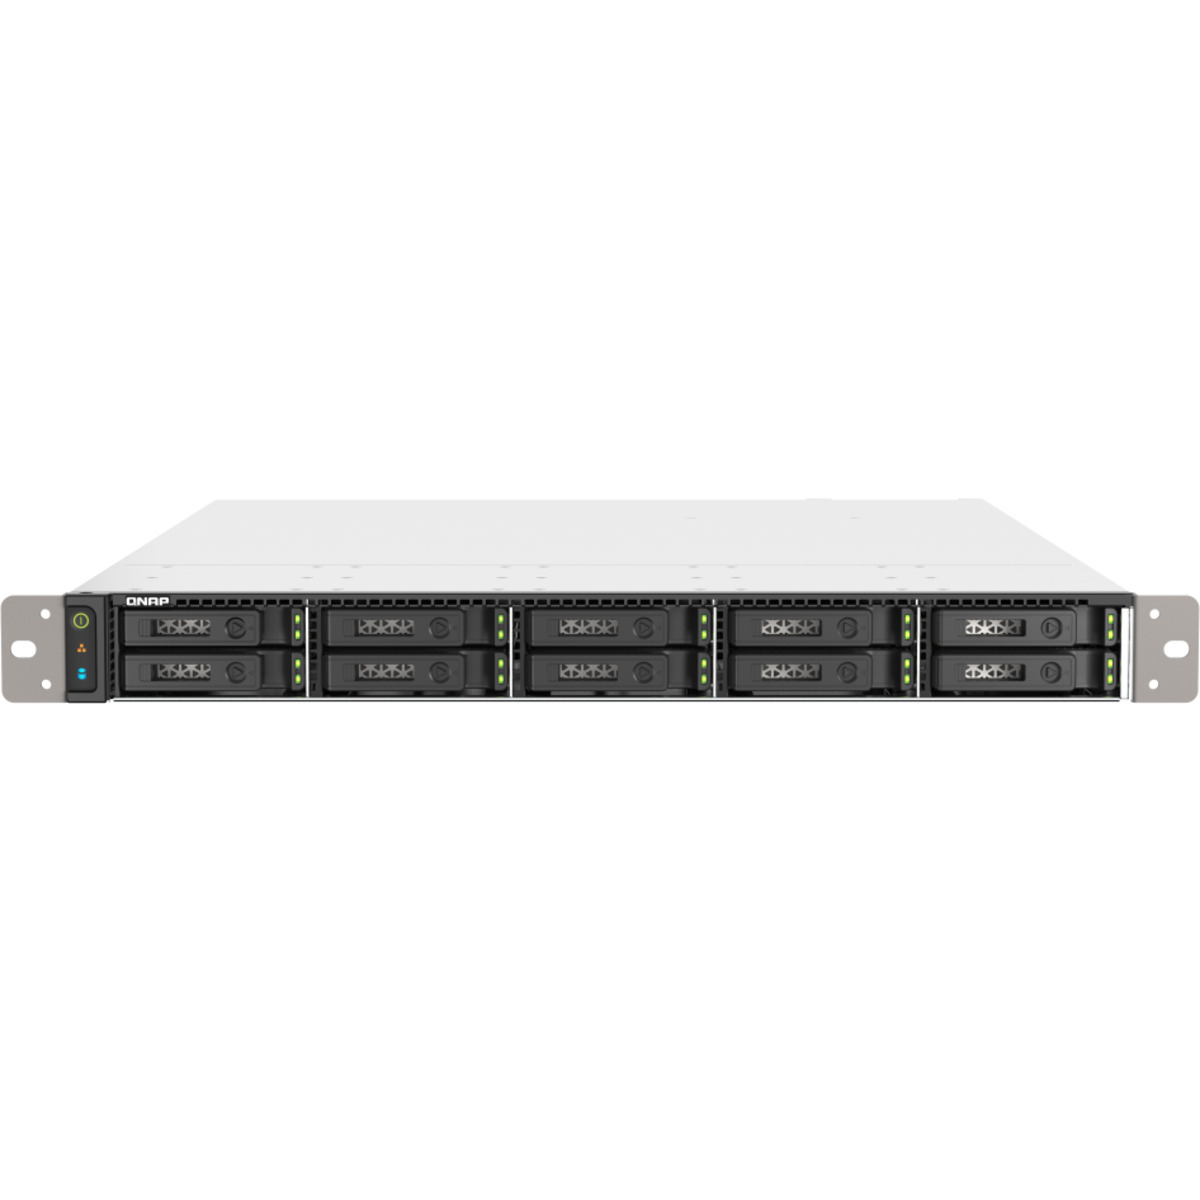 QNAP TS-h1090FU-7232P 12tb 10-Bay RackMount Large Business / Enterprise NAS - Network Attached Storage Device 6x2tb Western Digital Red SA500 WDS200T1R0A 2.5 560/530MB/s SATA 6Gb/s SSD NAS Class Drives Installed - Burn-In Tested TS-h1090FU-7232P